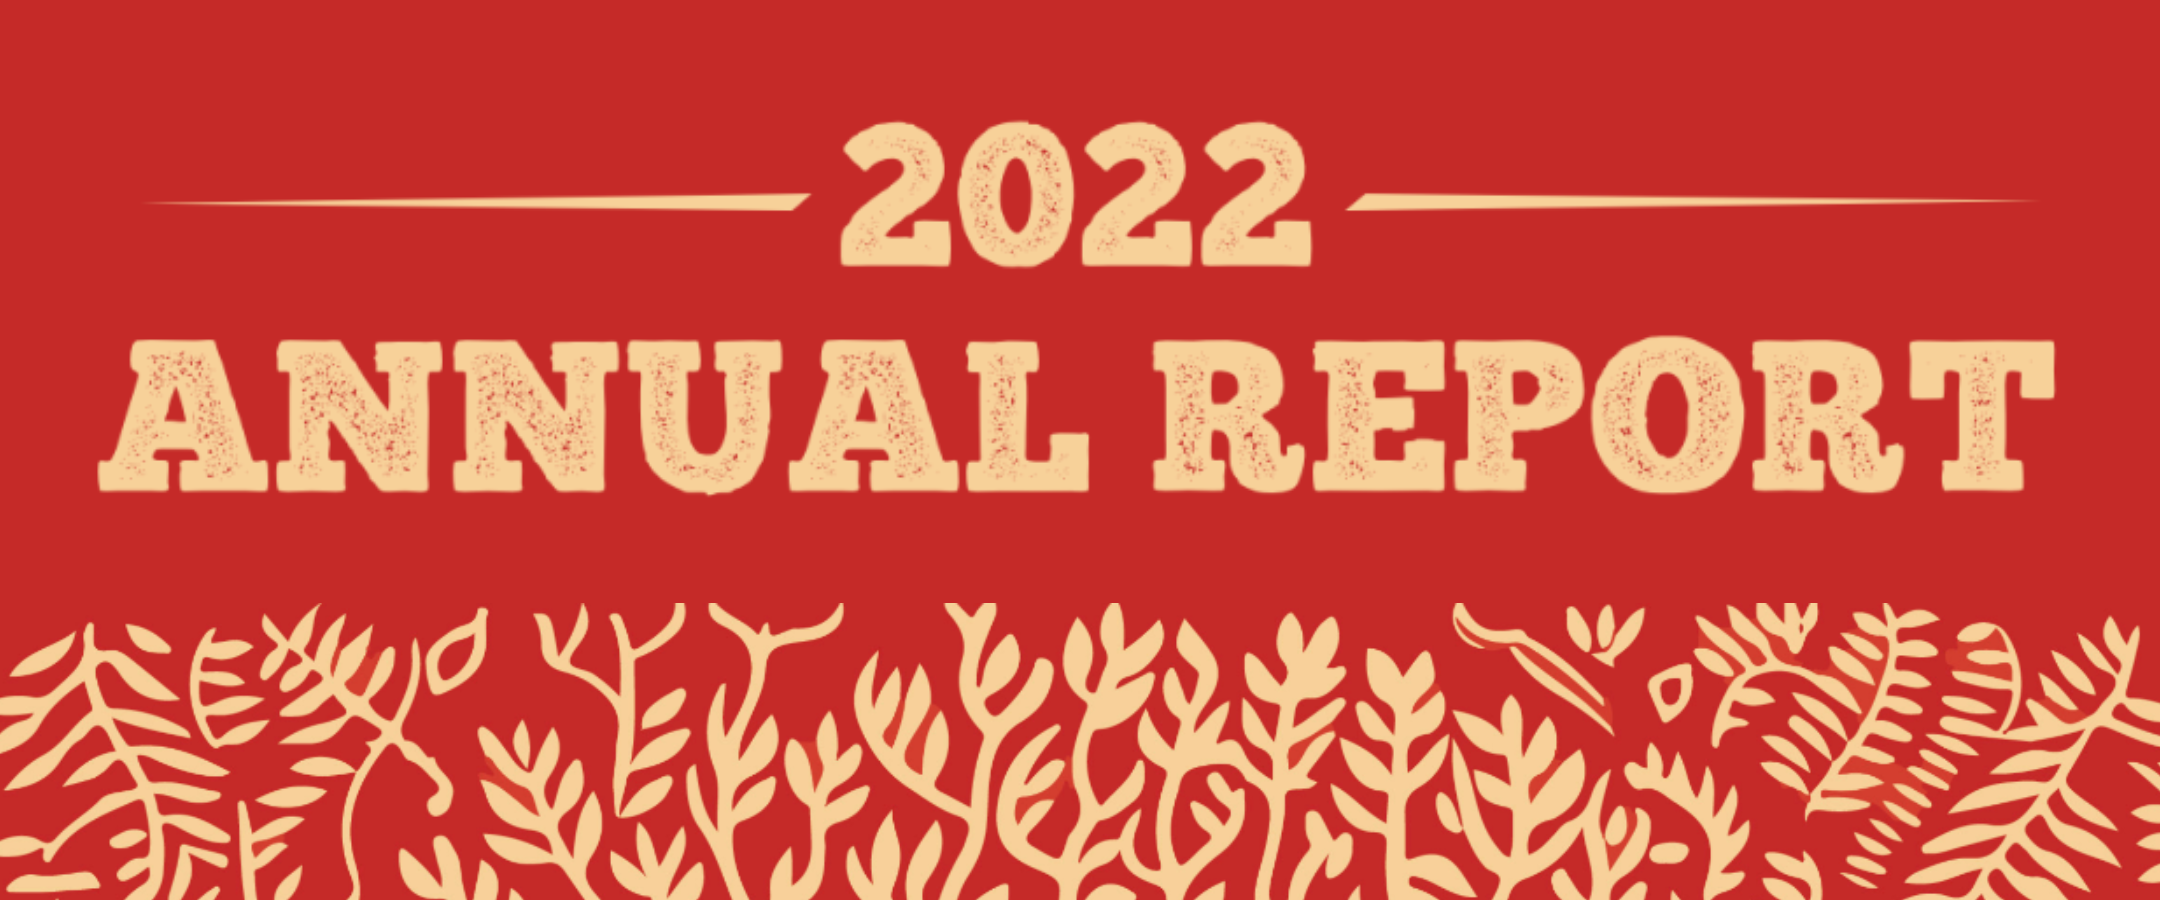 red banner image with cream drawing of intricate tree branches. Cream text reads 2022 Annual Report